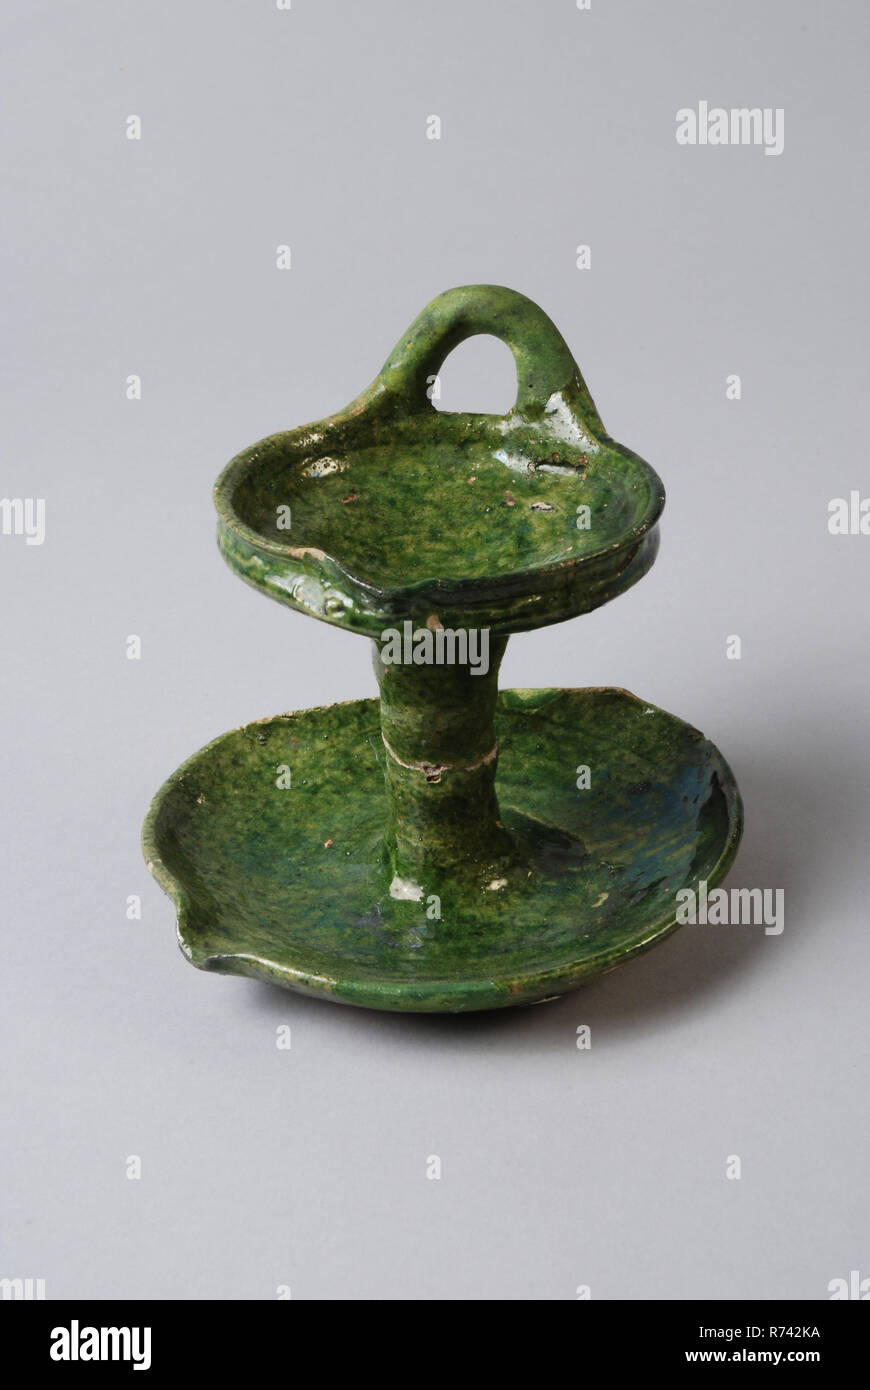 Green earthenware oil lamp with pouring lip and standing ear, two bowls with column between them, oil lamp lamp illuminant soil find ceramic earthenware glaze, hand turned glazed baked Green glazed oil lamp. White shard Two bowls connected by trunk Smaller upper shell with hanging ear and pouring clip Schenklip shell placed more to the side Outstretched soul at the bottom under the column Restoration is painted on color archeology lighting indigenous pottery illuminate oil lamp sleeping evening night Stock Photo